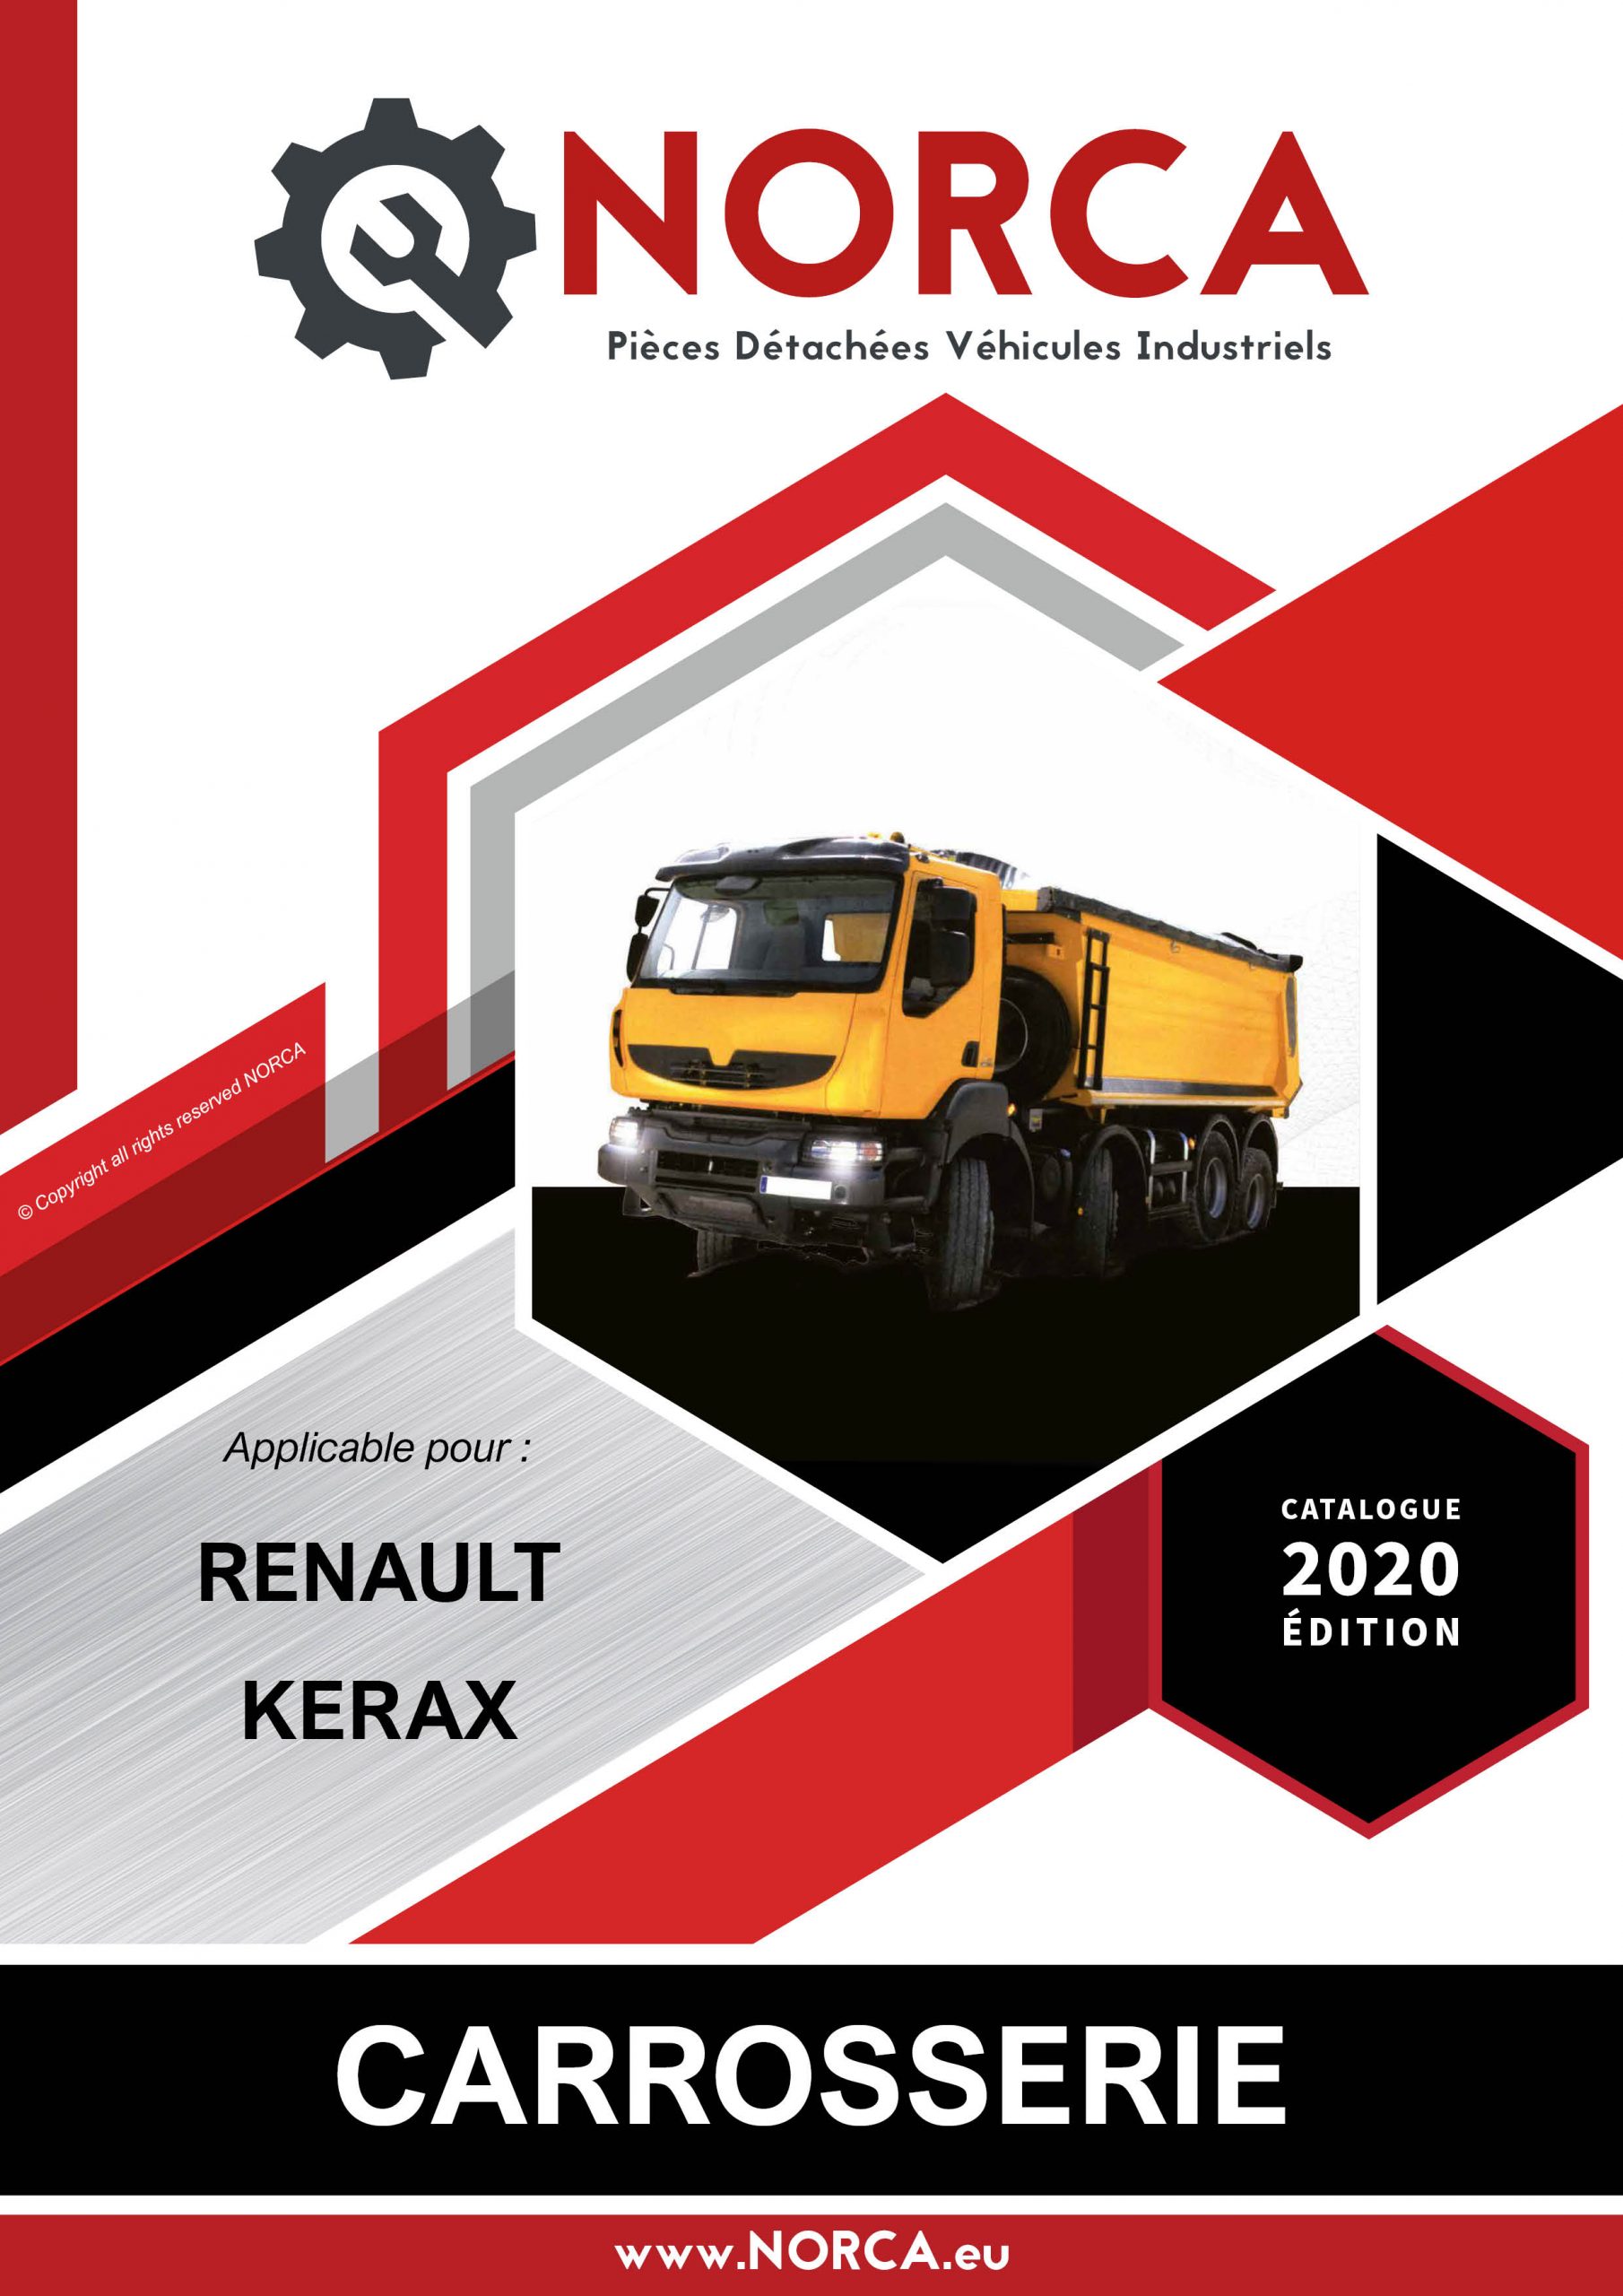 Couv-Catalogue-Renault-Kerax-01-NORCA-scaled